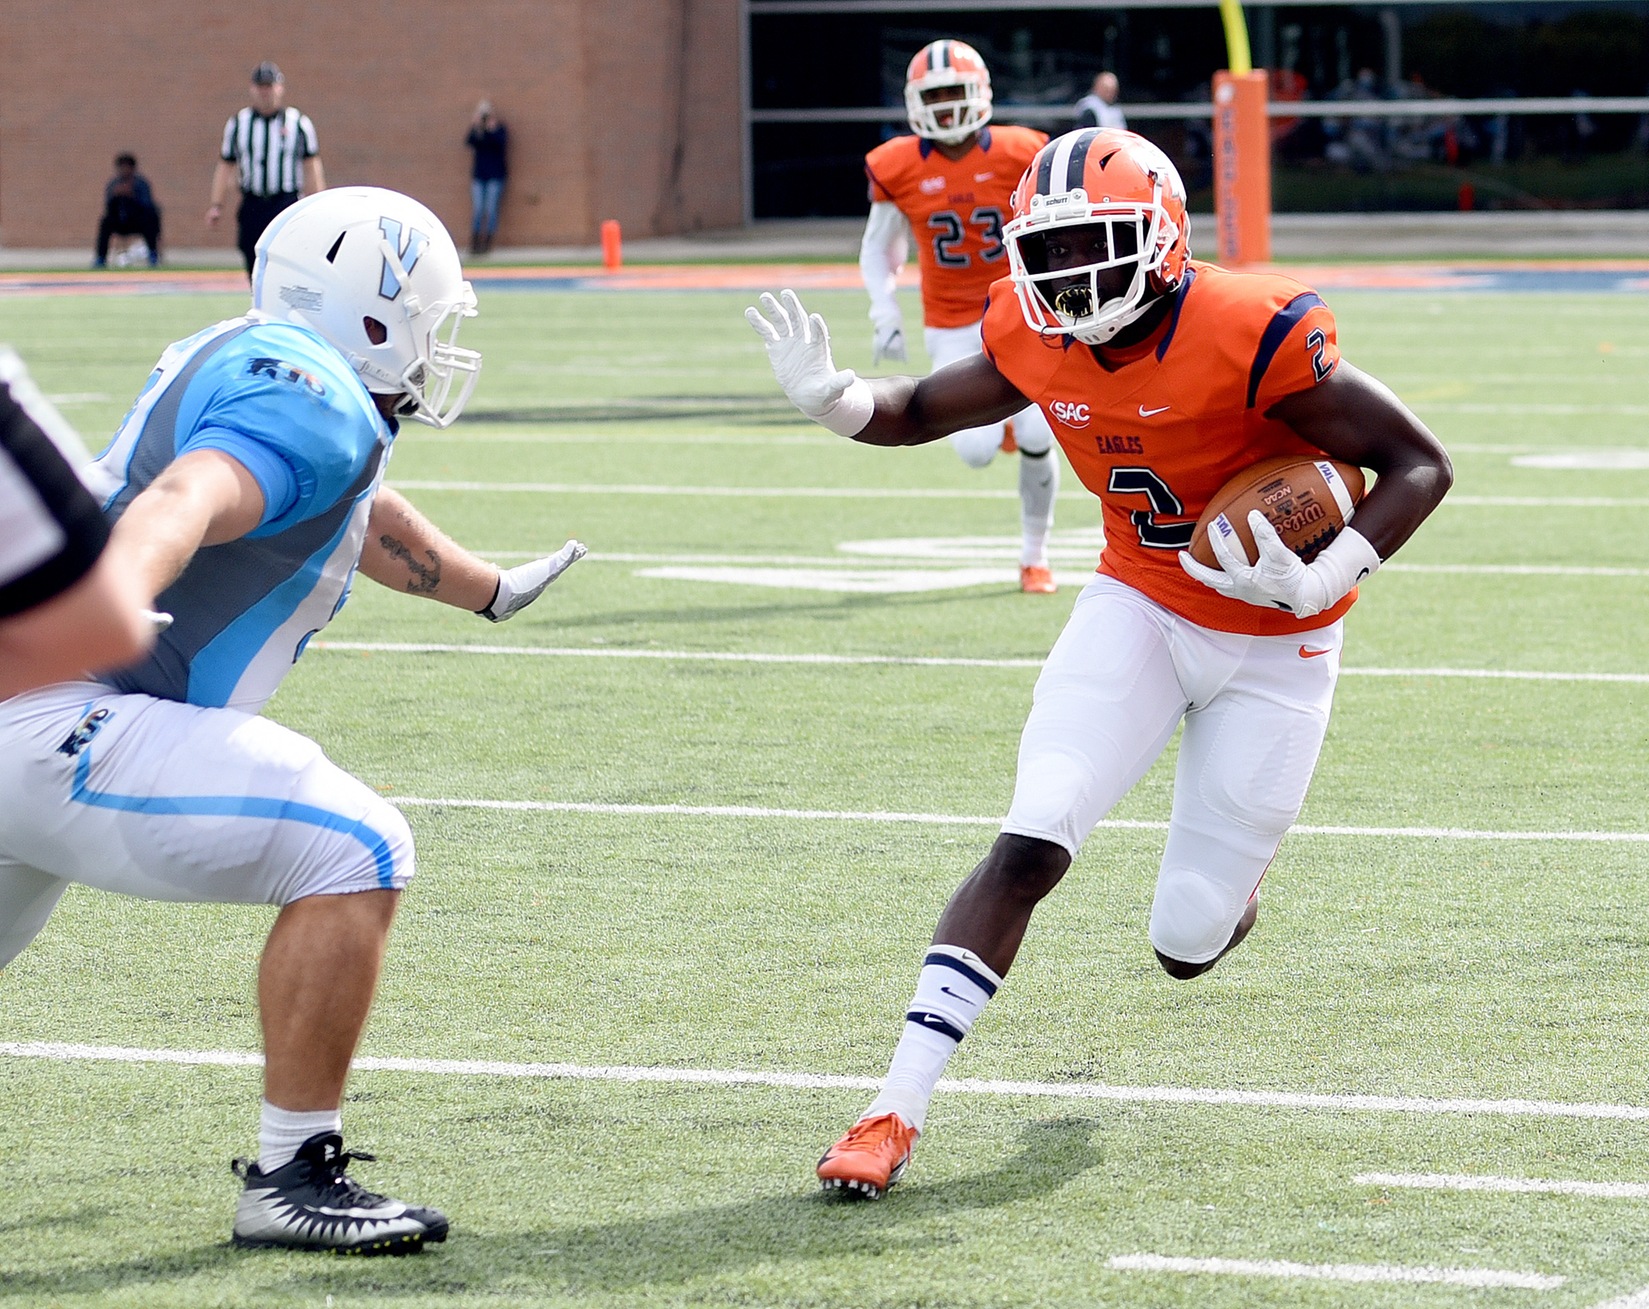 Carson-Newman flambés Dragons for fourth straight win 63-10